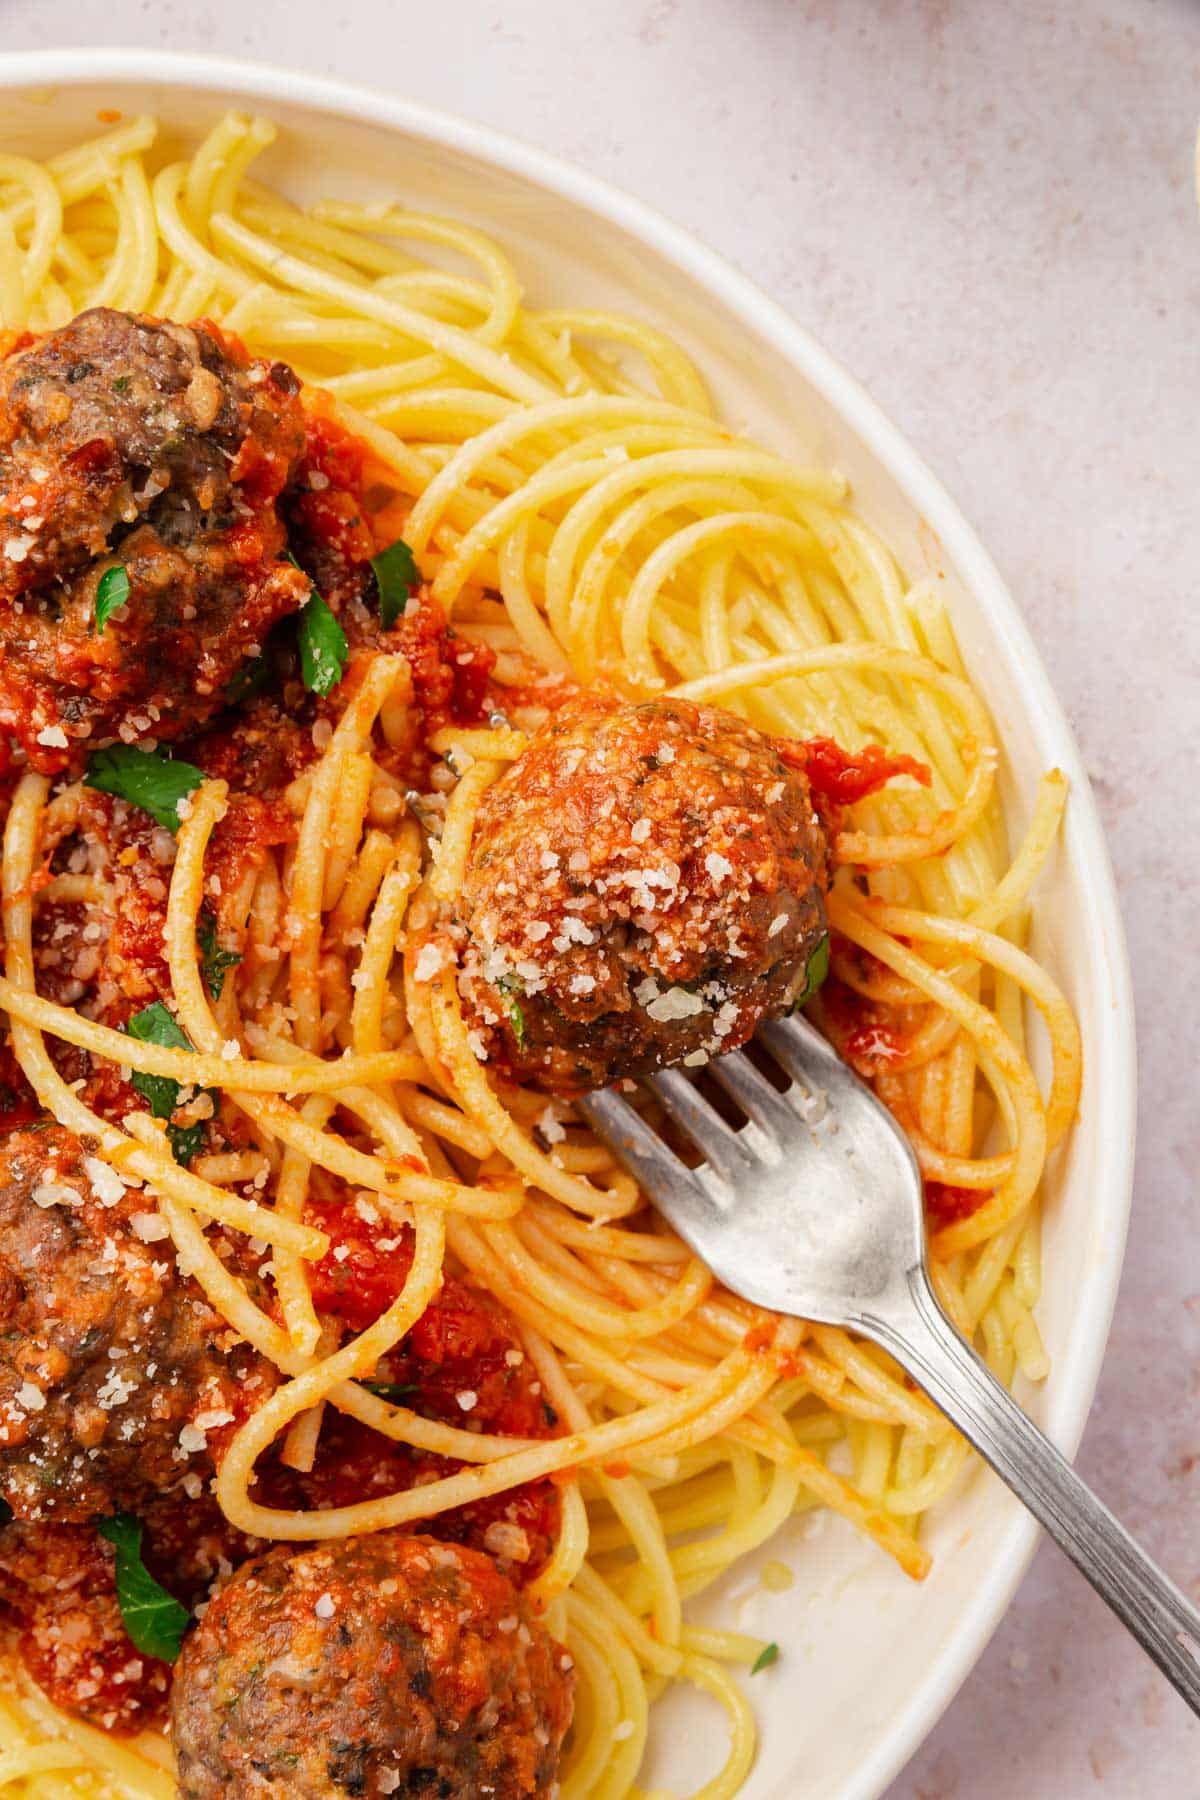 A bowl of spaghetti, gluten-free meatballs and marinara sauce with a fork.